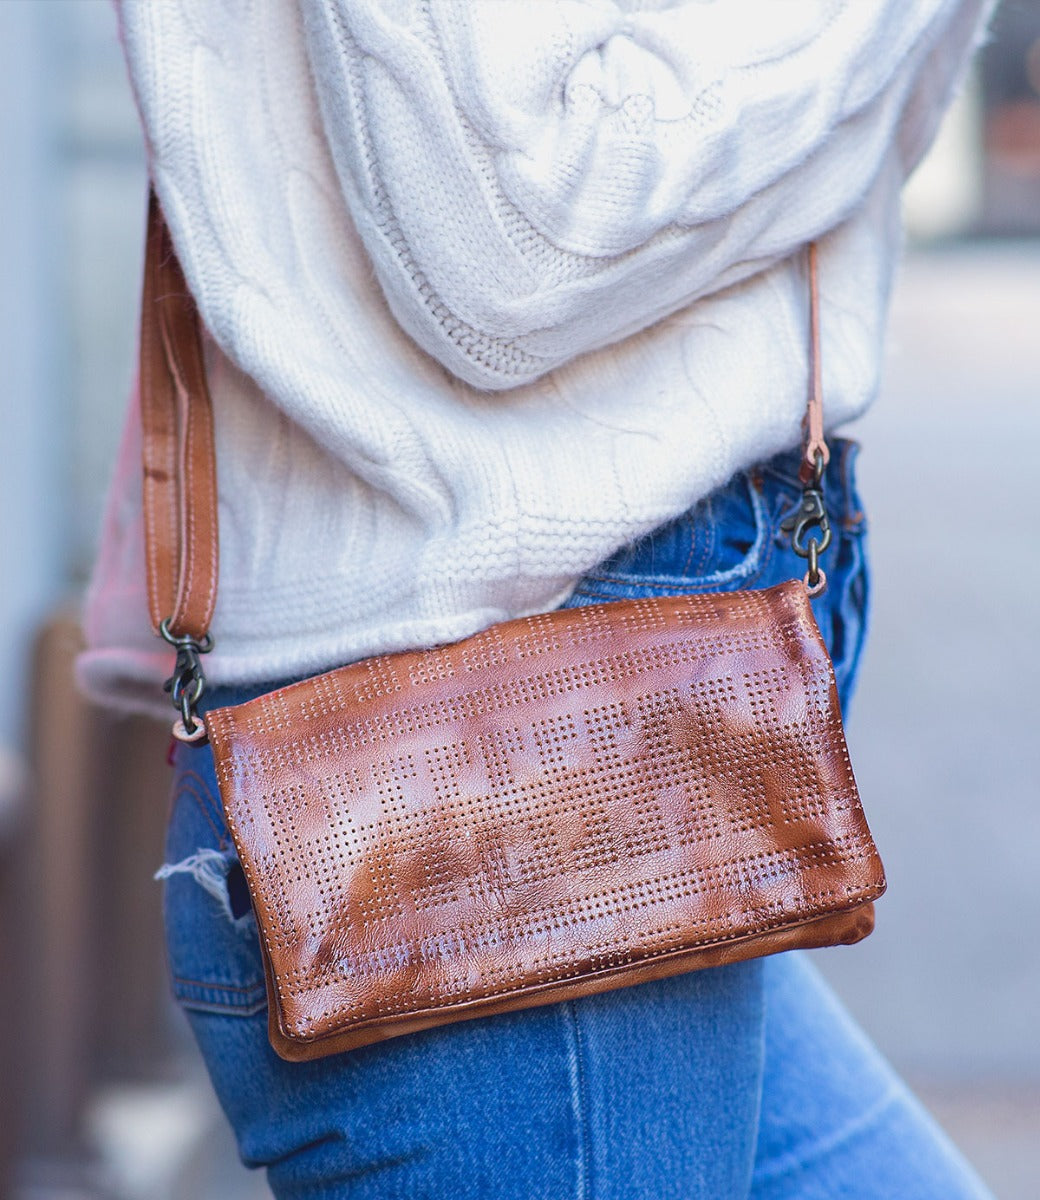 A woman wearing jeans and a Bed Stu Bayshore tan leather crossbody bag.